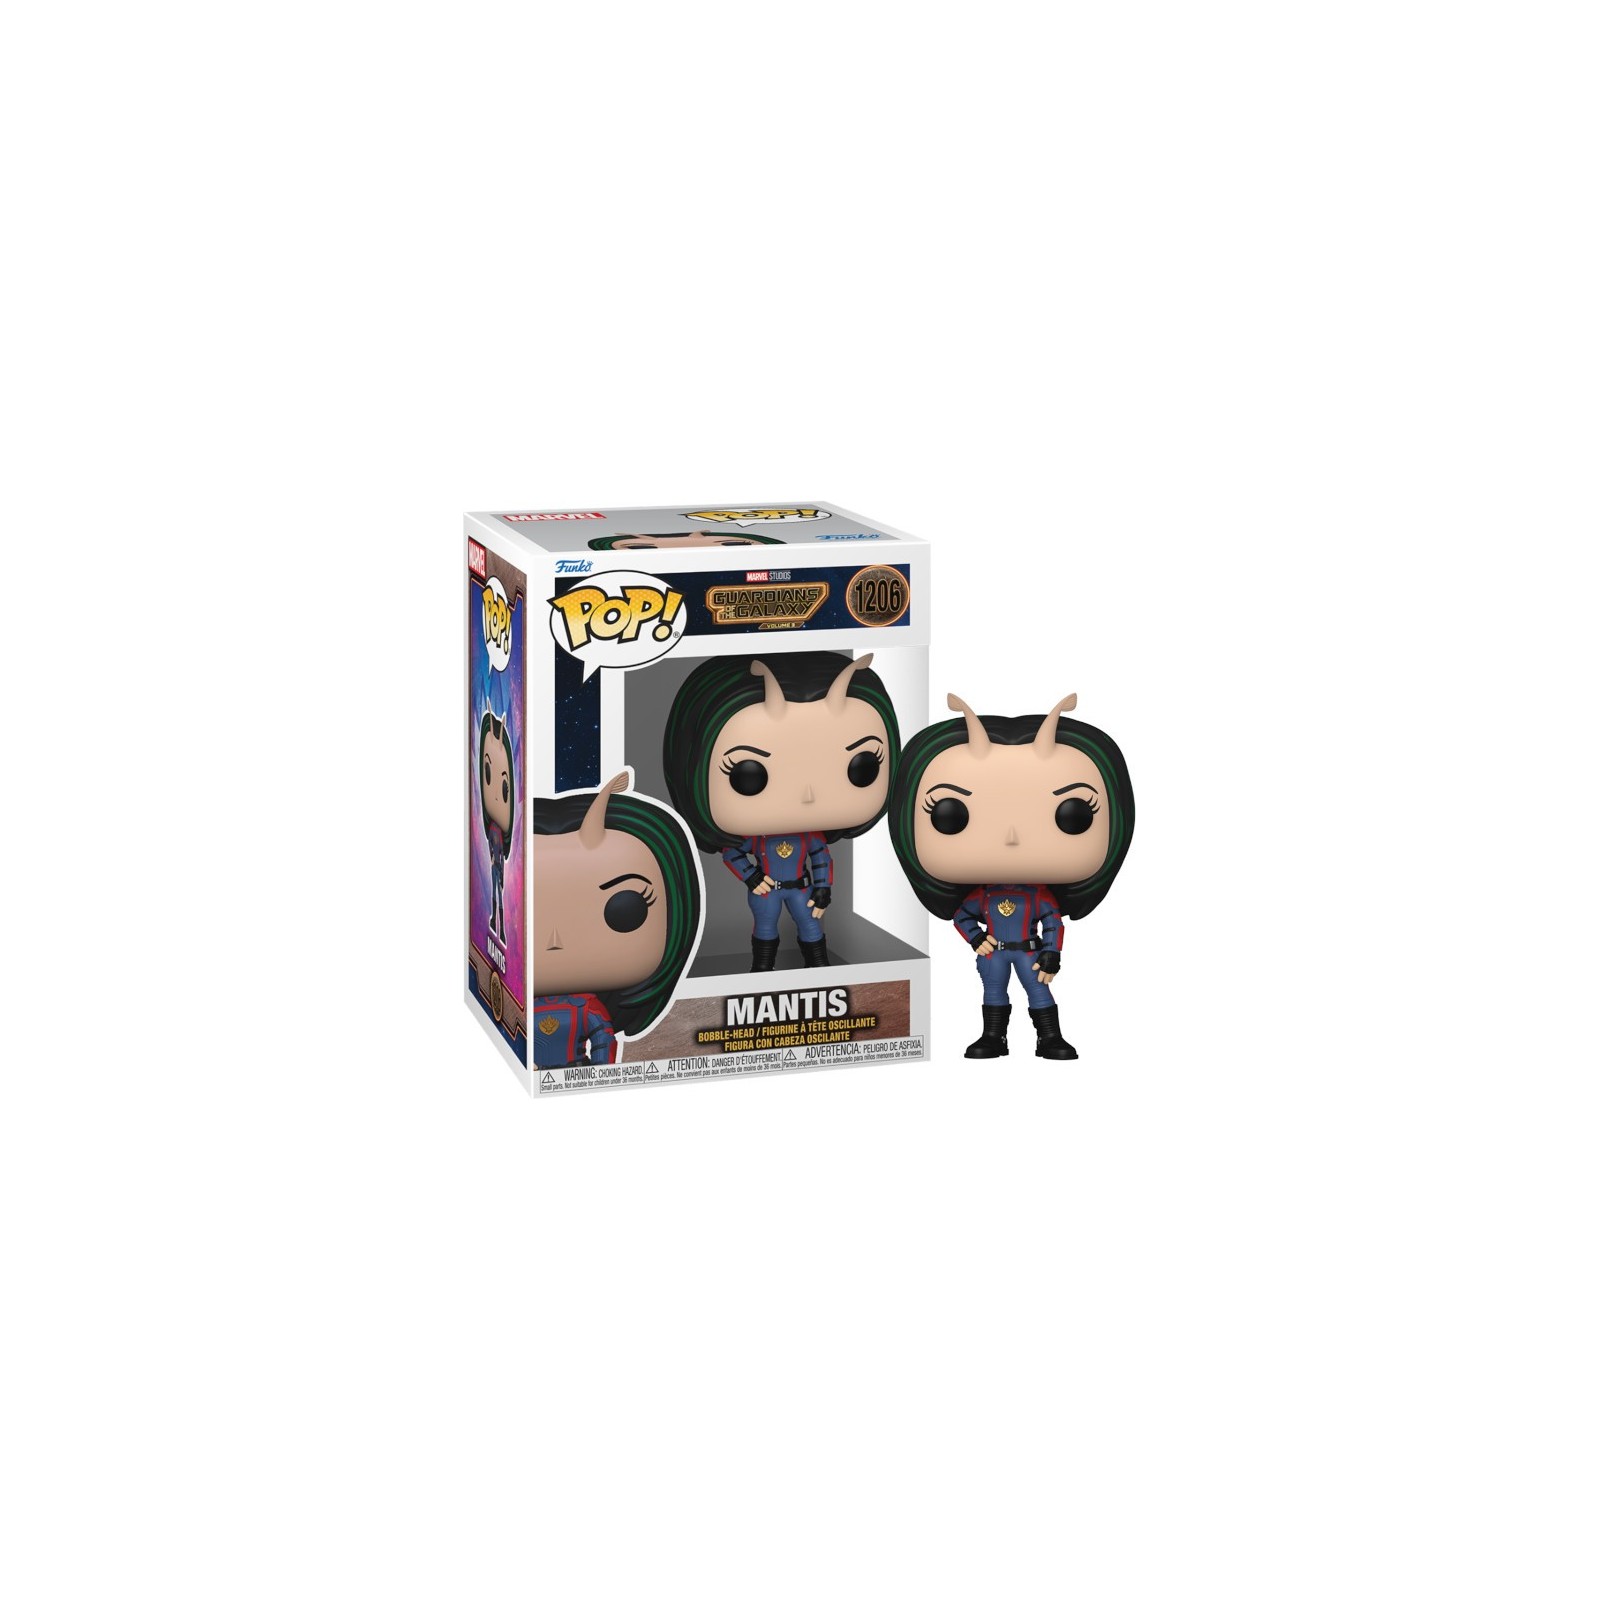 FUNKO POP! MARVEL THE GUARDIANS OF THE GALAXY: MANTIS (1206)